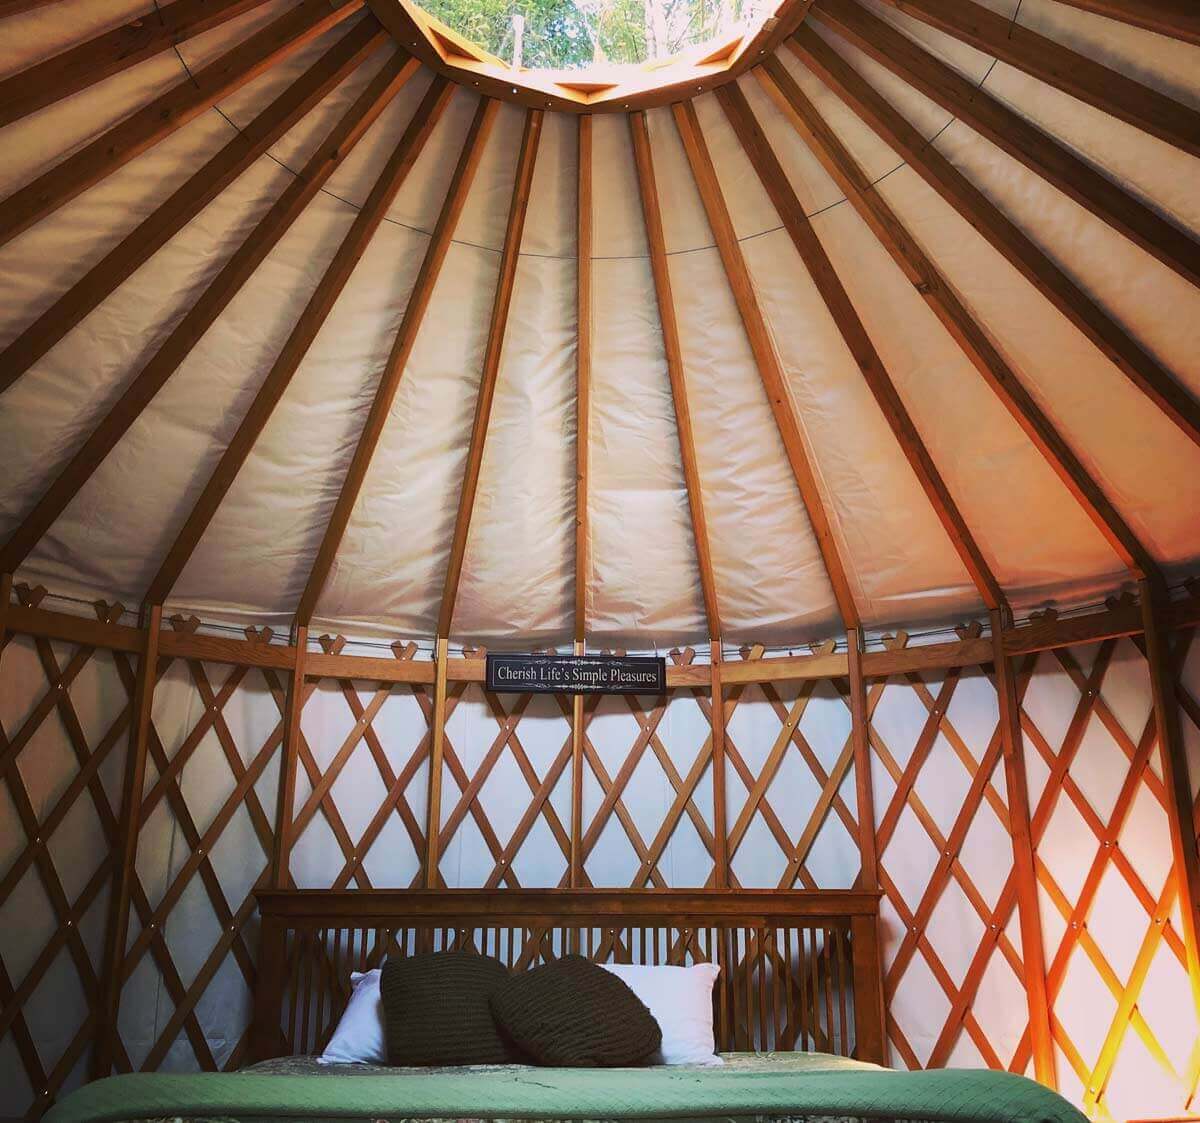 Inside One of Our Casey Yurt Site